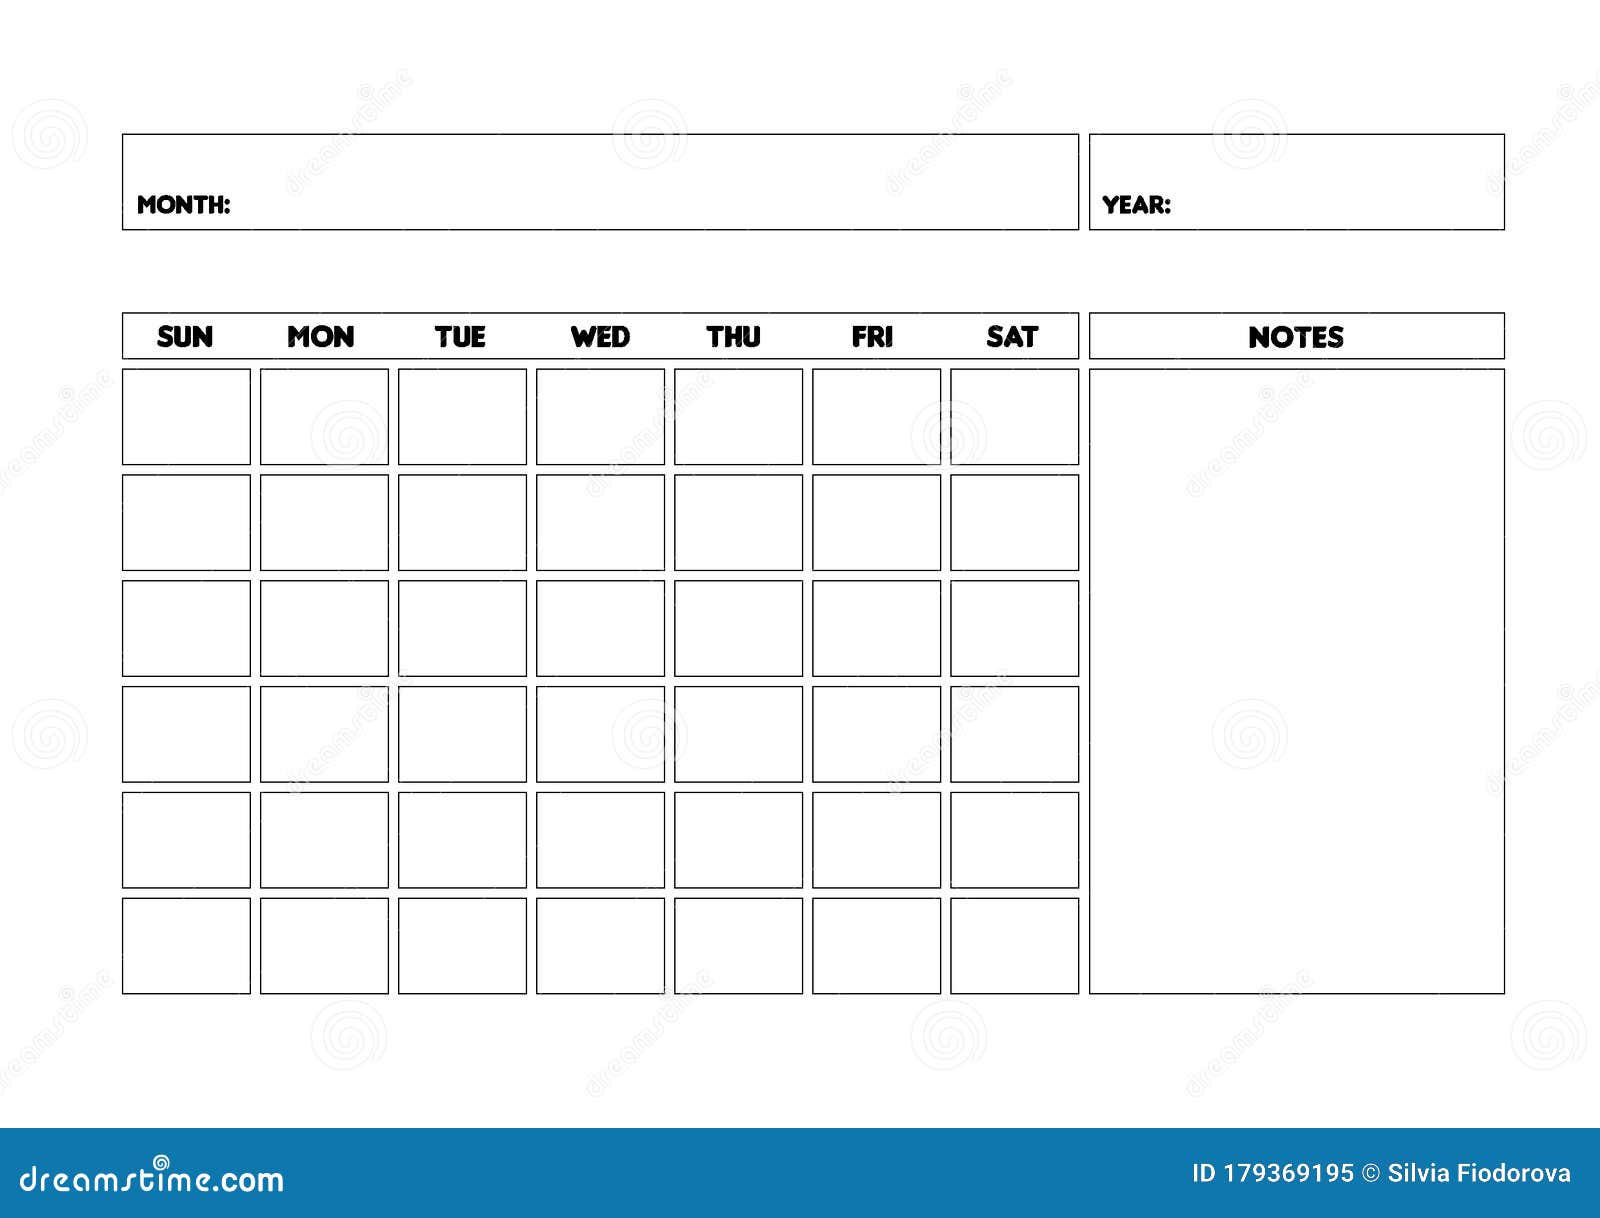 Template For Monthly Calendar from thumbs.dreamstime.com